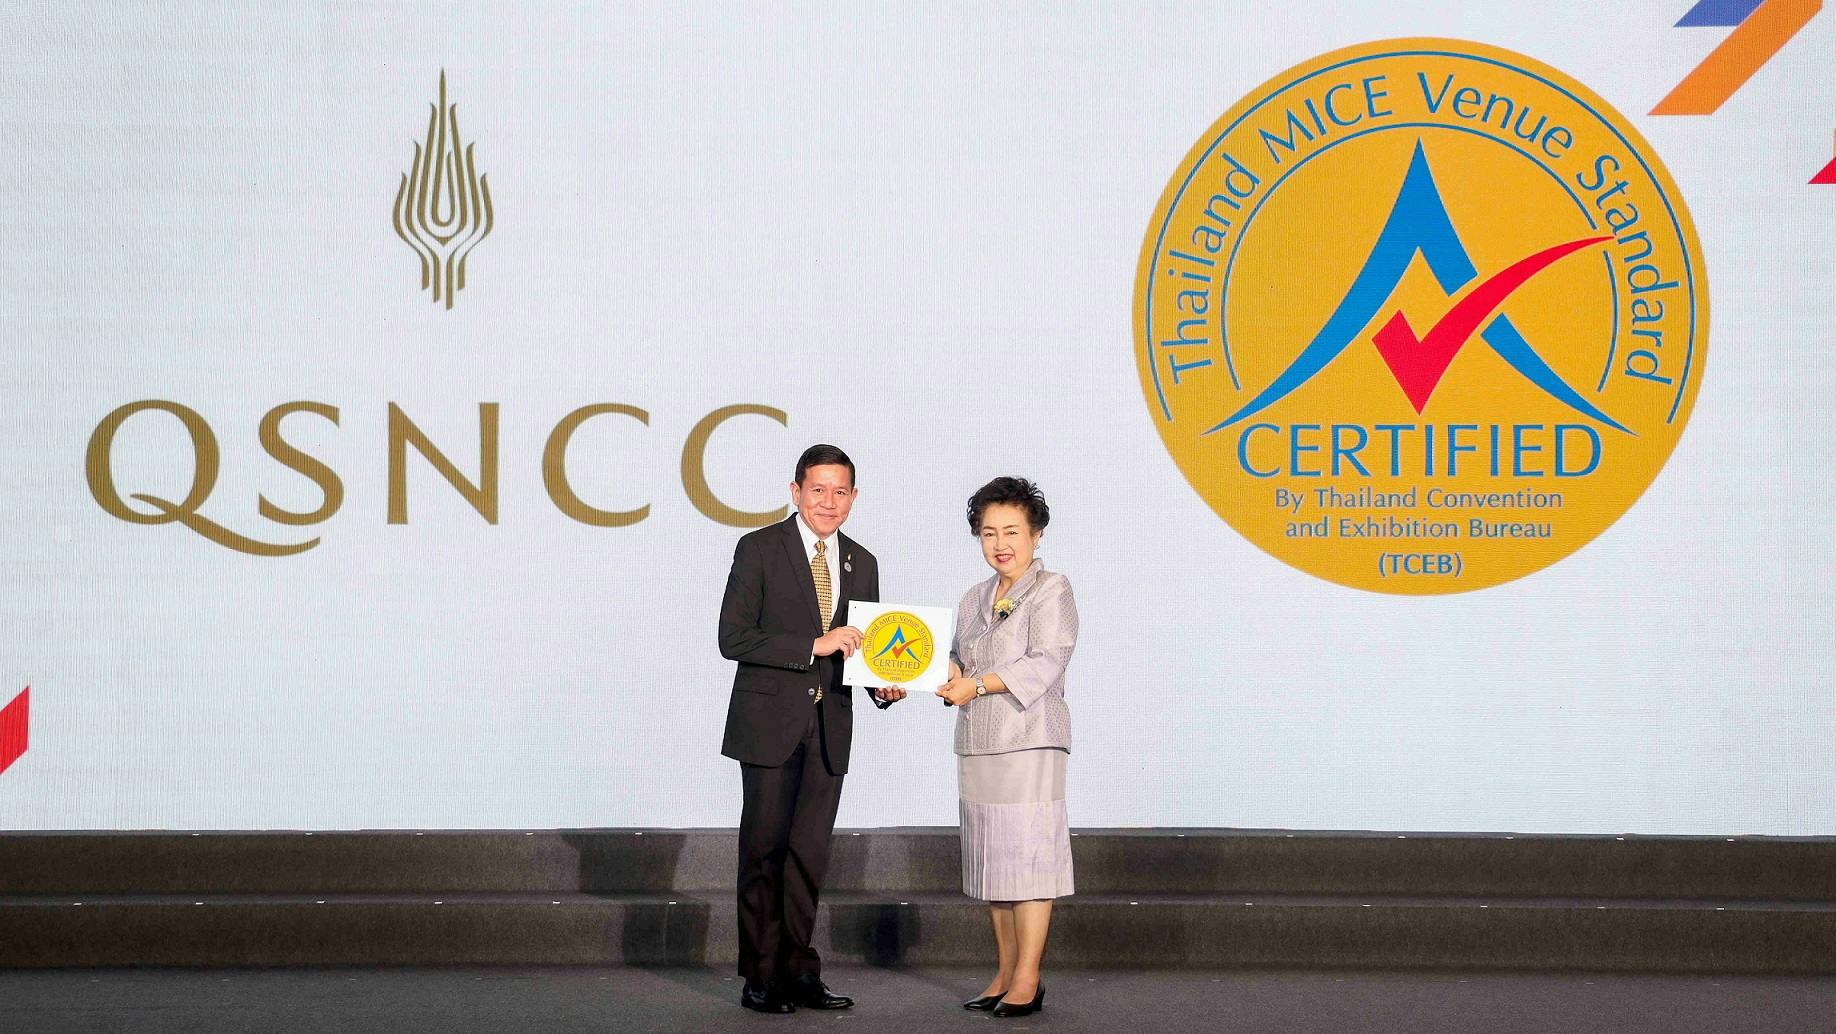 QSNCC Earns Thailand MICE Venue Standard Certification Affirming its Position as a Venue of International Quality